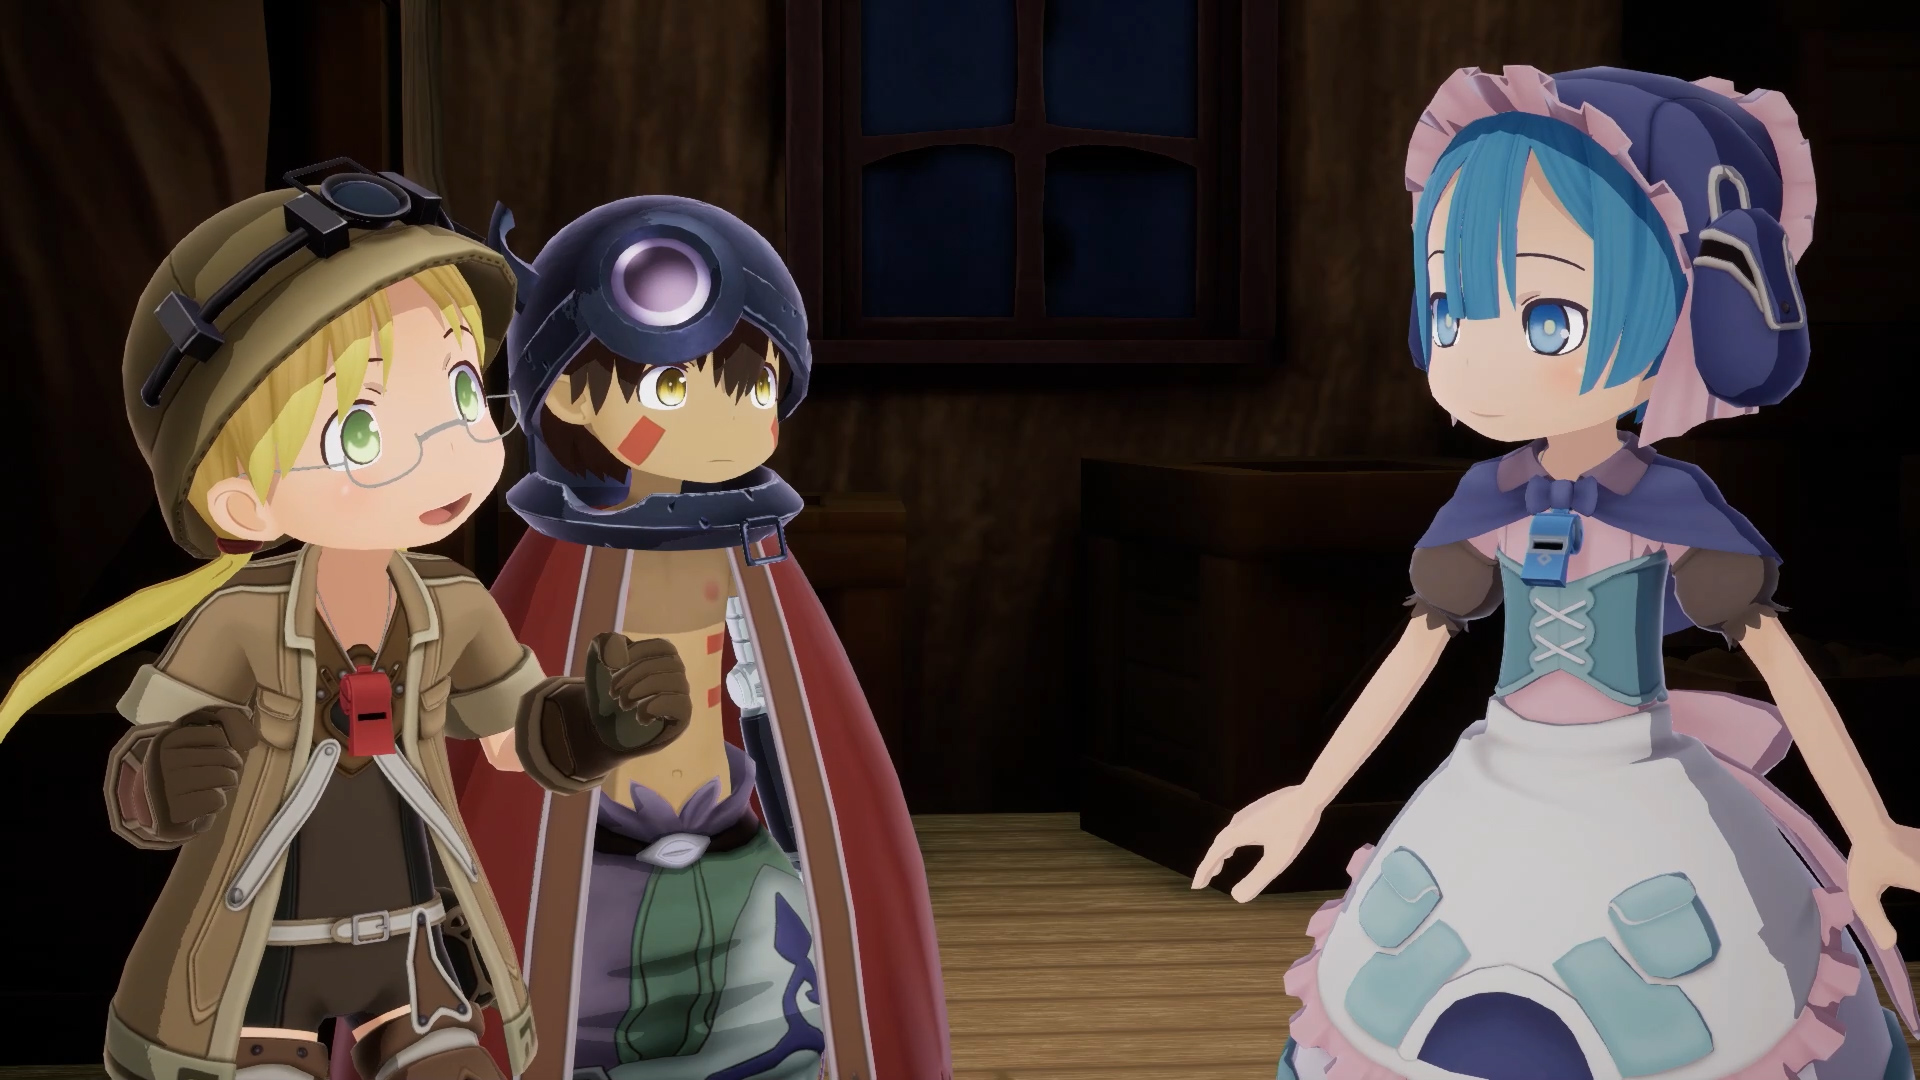 Made in Abyss: Binary Star Falling into Darkness Notebook Introduced,  Original Story to feature characters from Made in Abyss - Spike Chunsoft